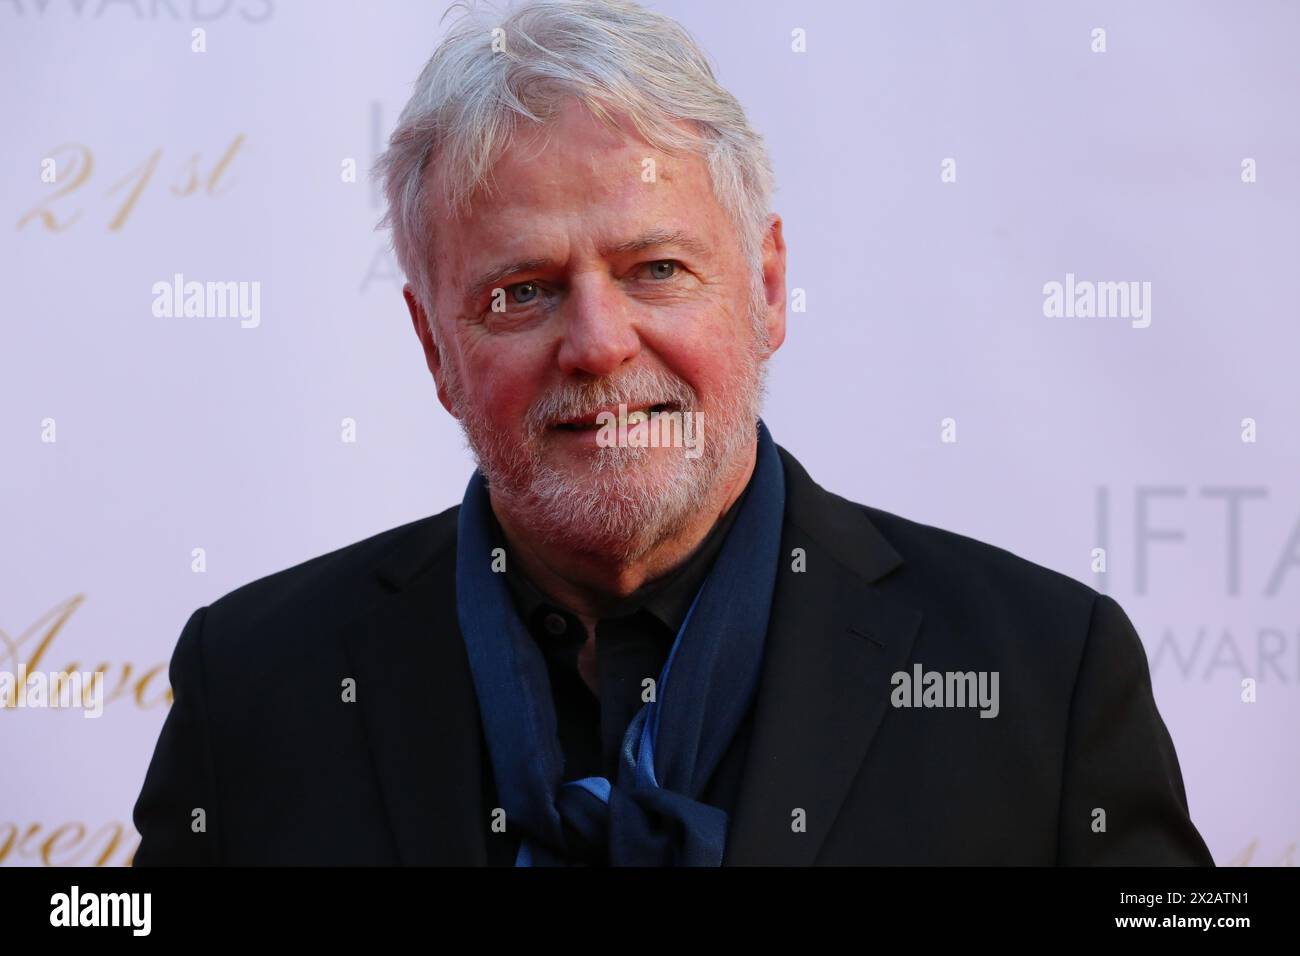 Dublin, Ireland. 20th April 2024. Aidan Quinn arriving on the red carpet at the Irish Film and Television Awards (IFTA), Dublin Royal Convention Centre. Credit: Doreen Kennedy/Alamy Live News. Stock Photo